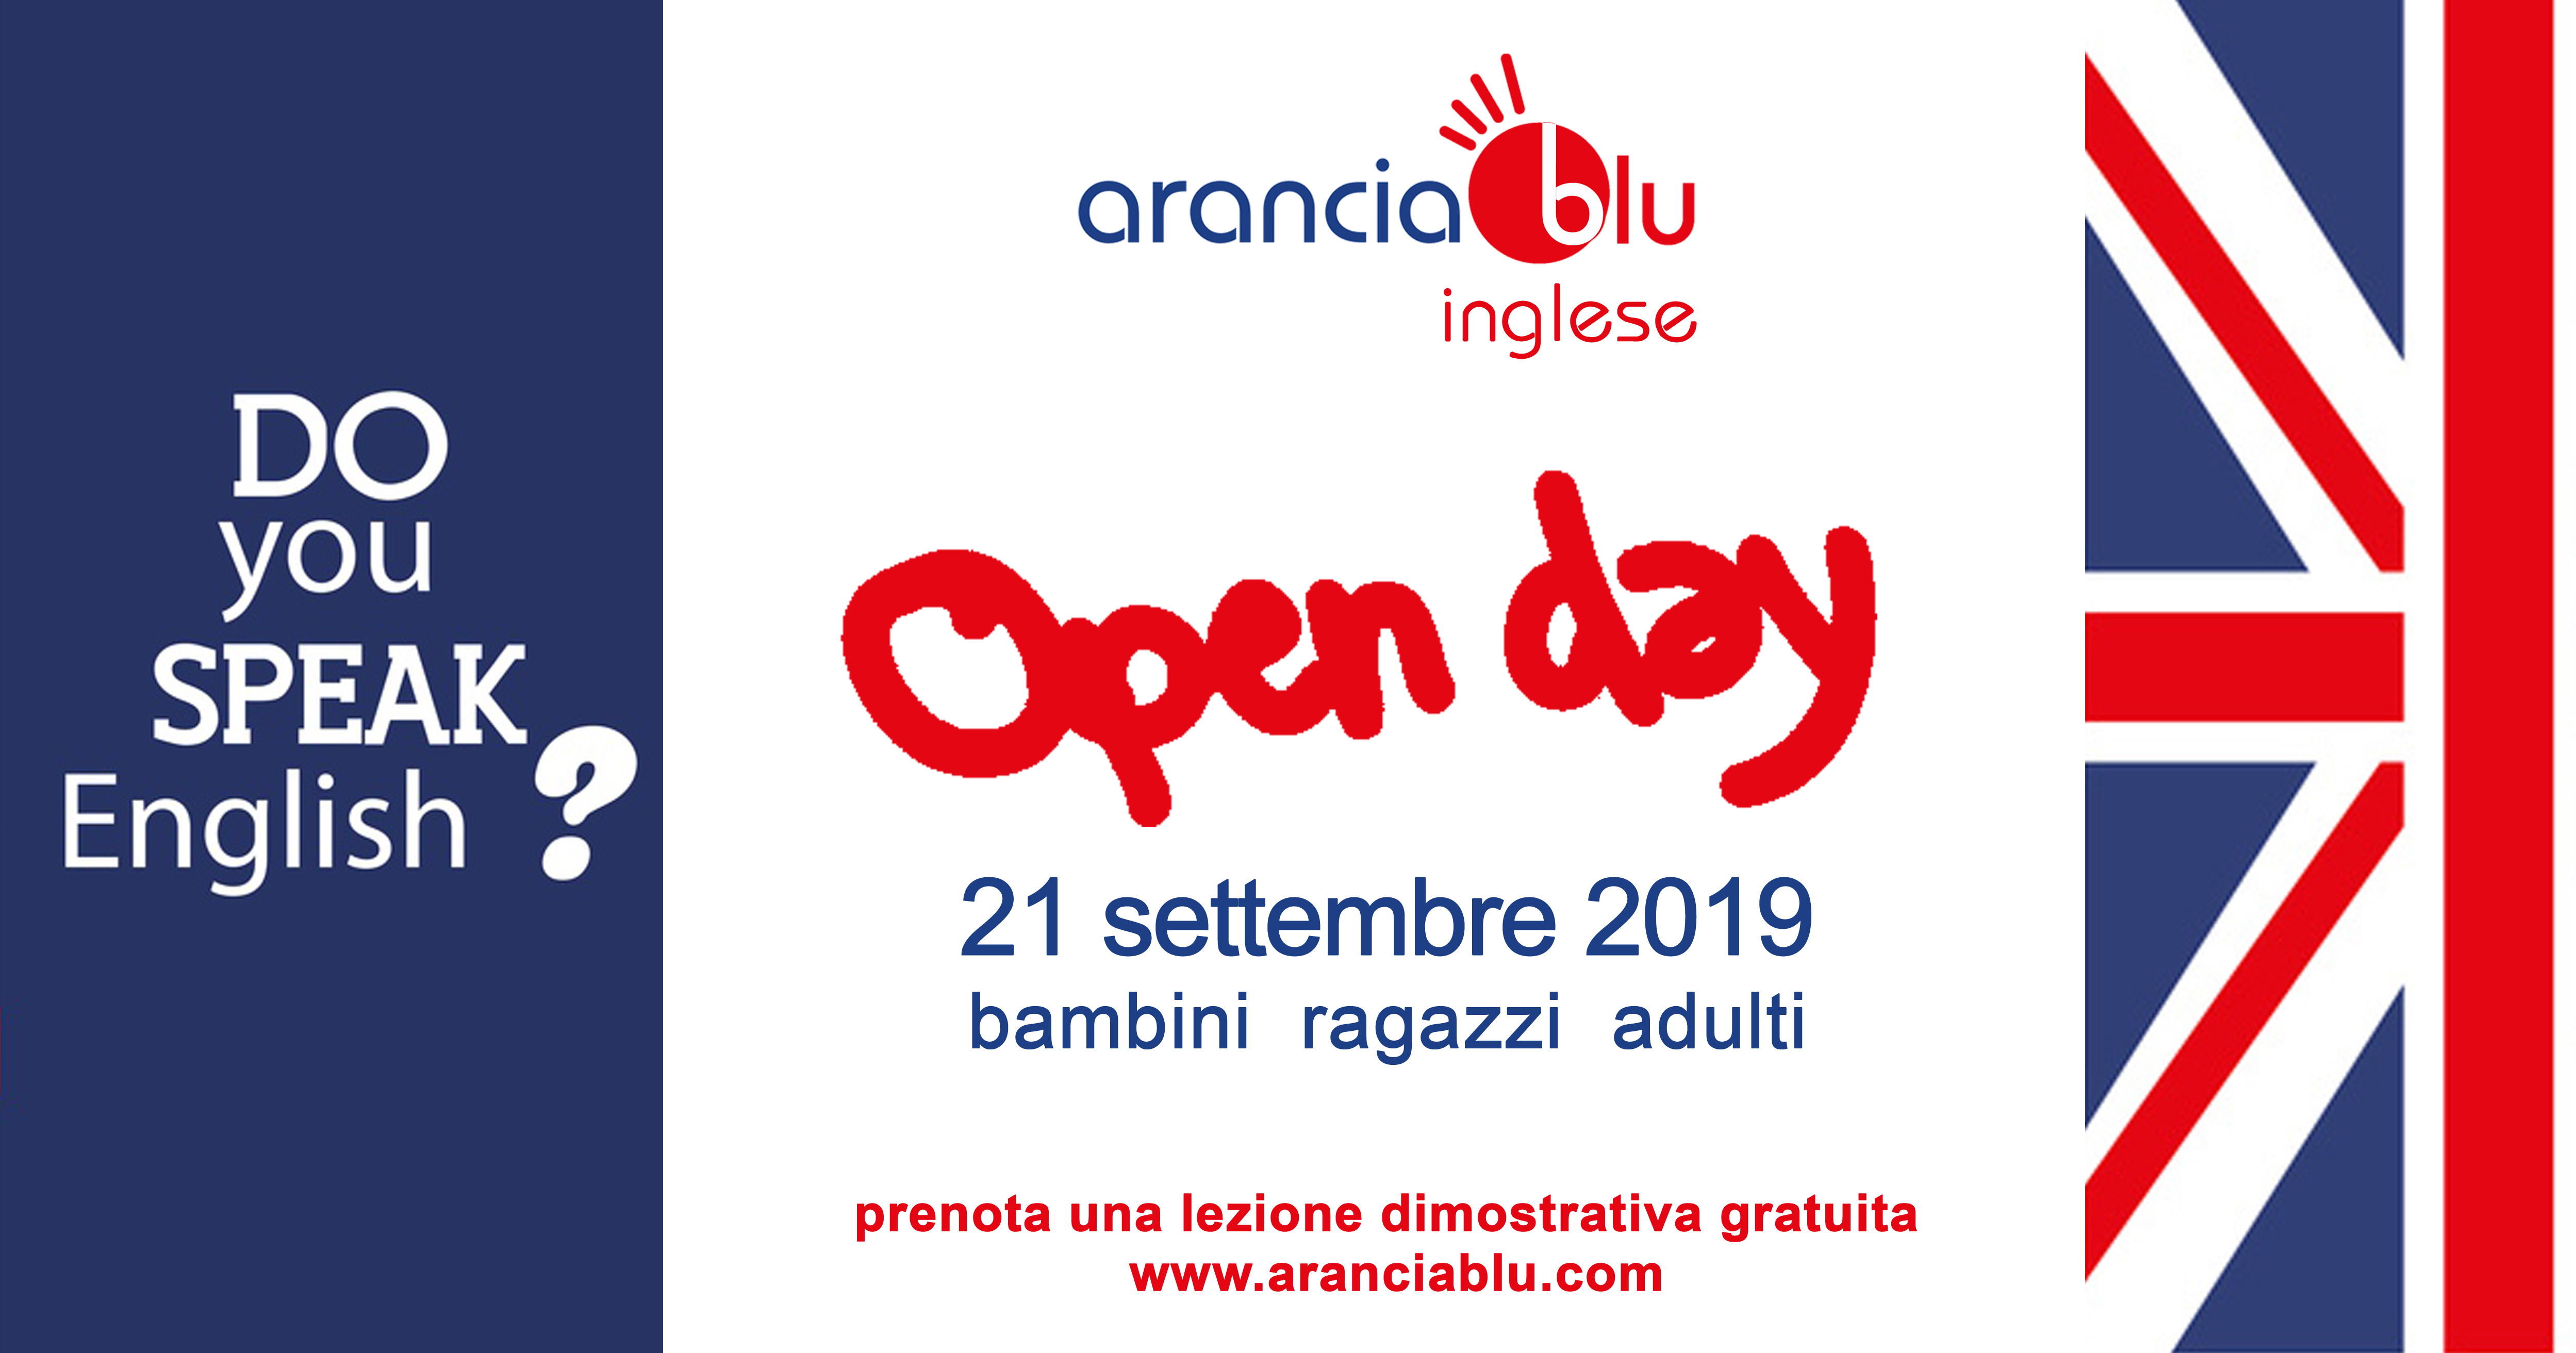 open-day-inglese-fronte-set-2019-20_11x21